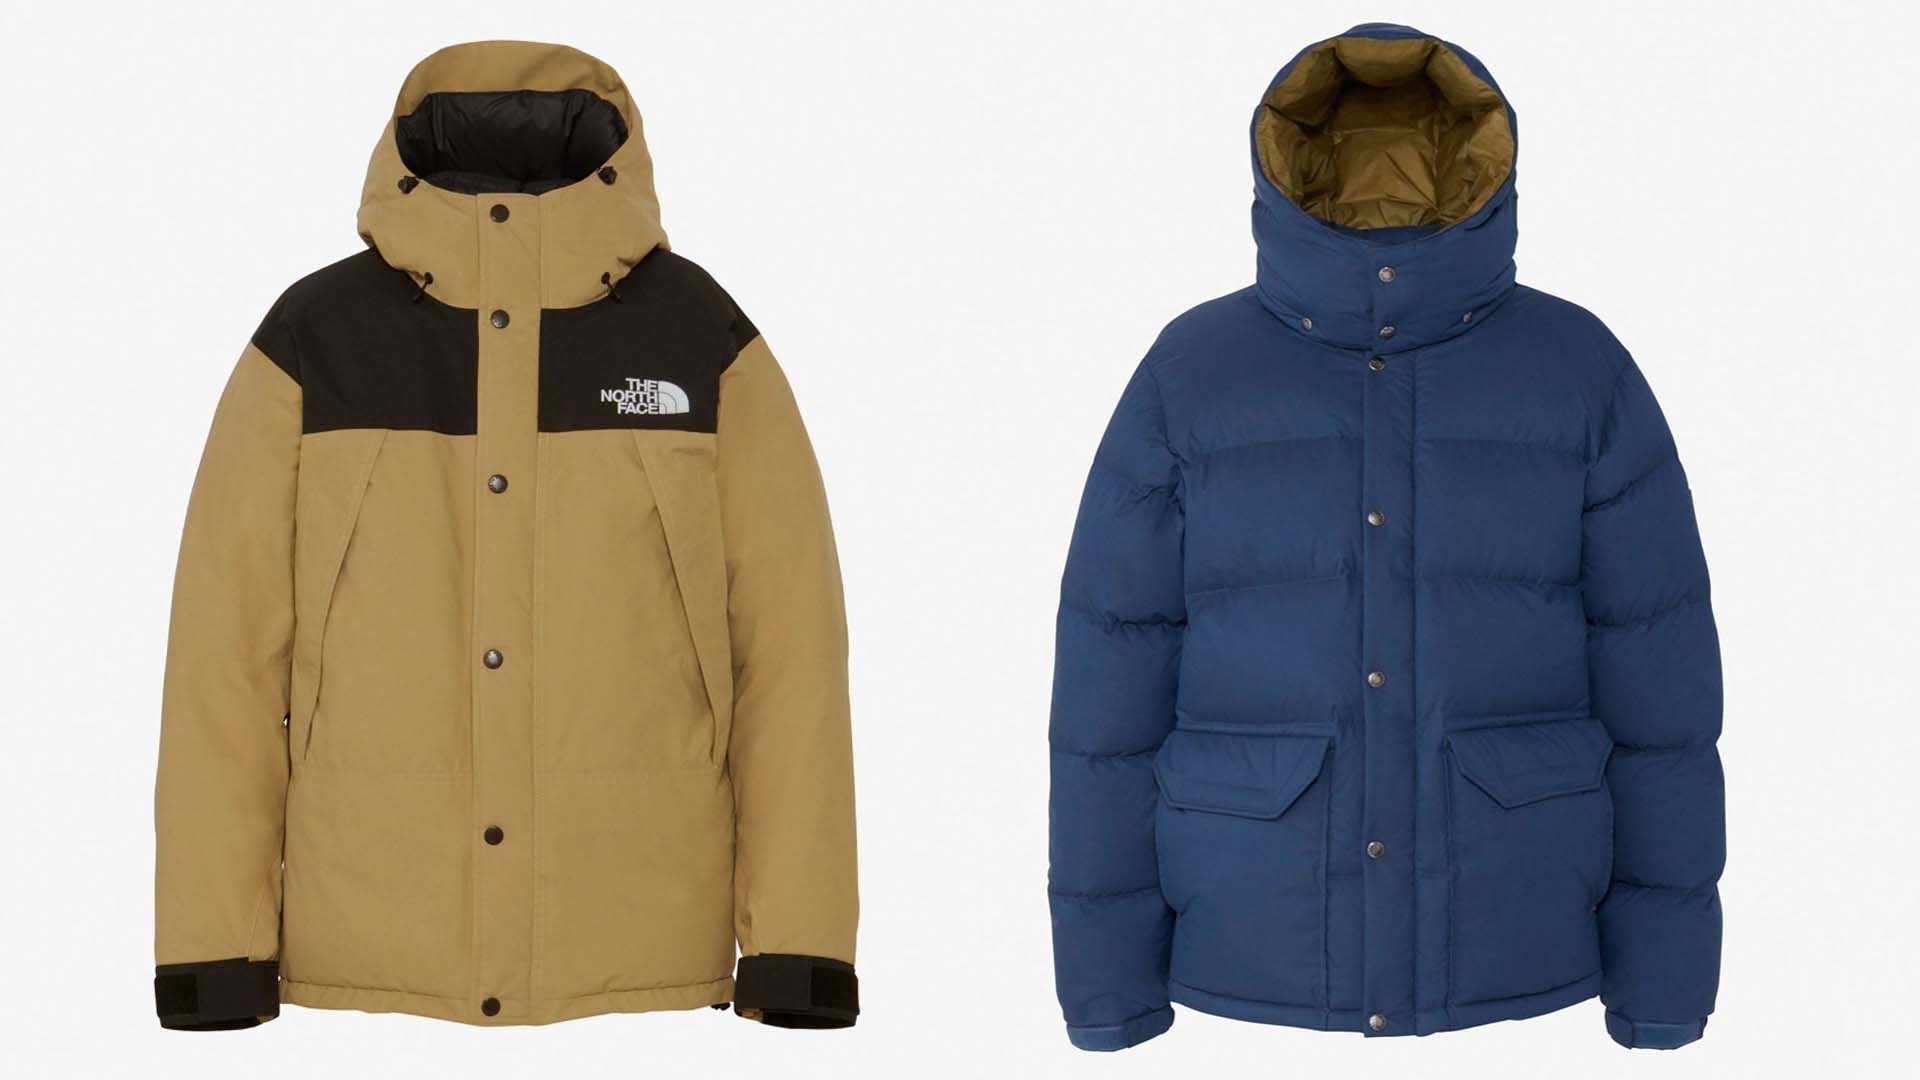 Unraveling the History of 'THE NORTH FACE' through High-Spec Model